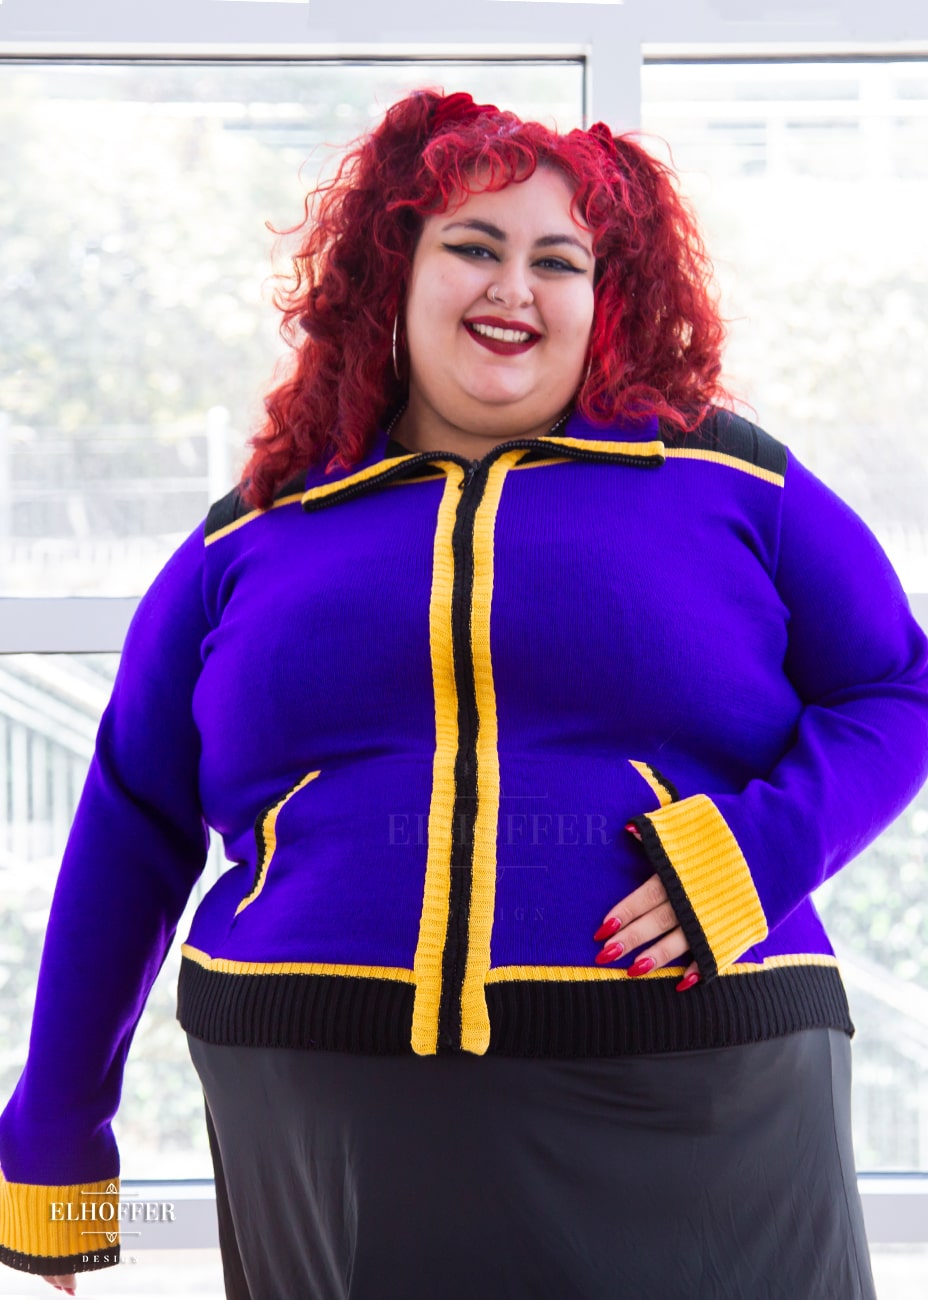 Victoria, an olive skinned 4XL model with curly bright red hair, is wearing a knit jacket featuring textured sleeves, ribbed kangaroo pockets, a hidden front zipper, and a gorgeous high neckline. The main body of the sweater is bright purple, with black and yellow details.